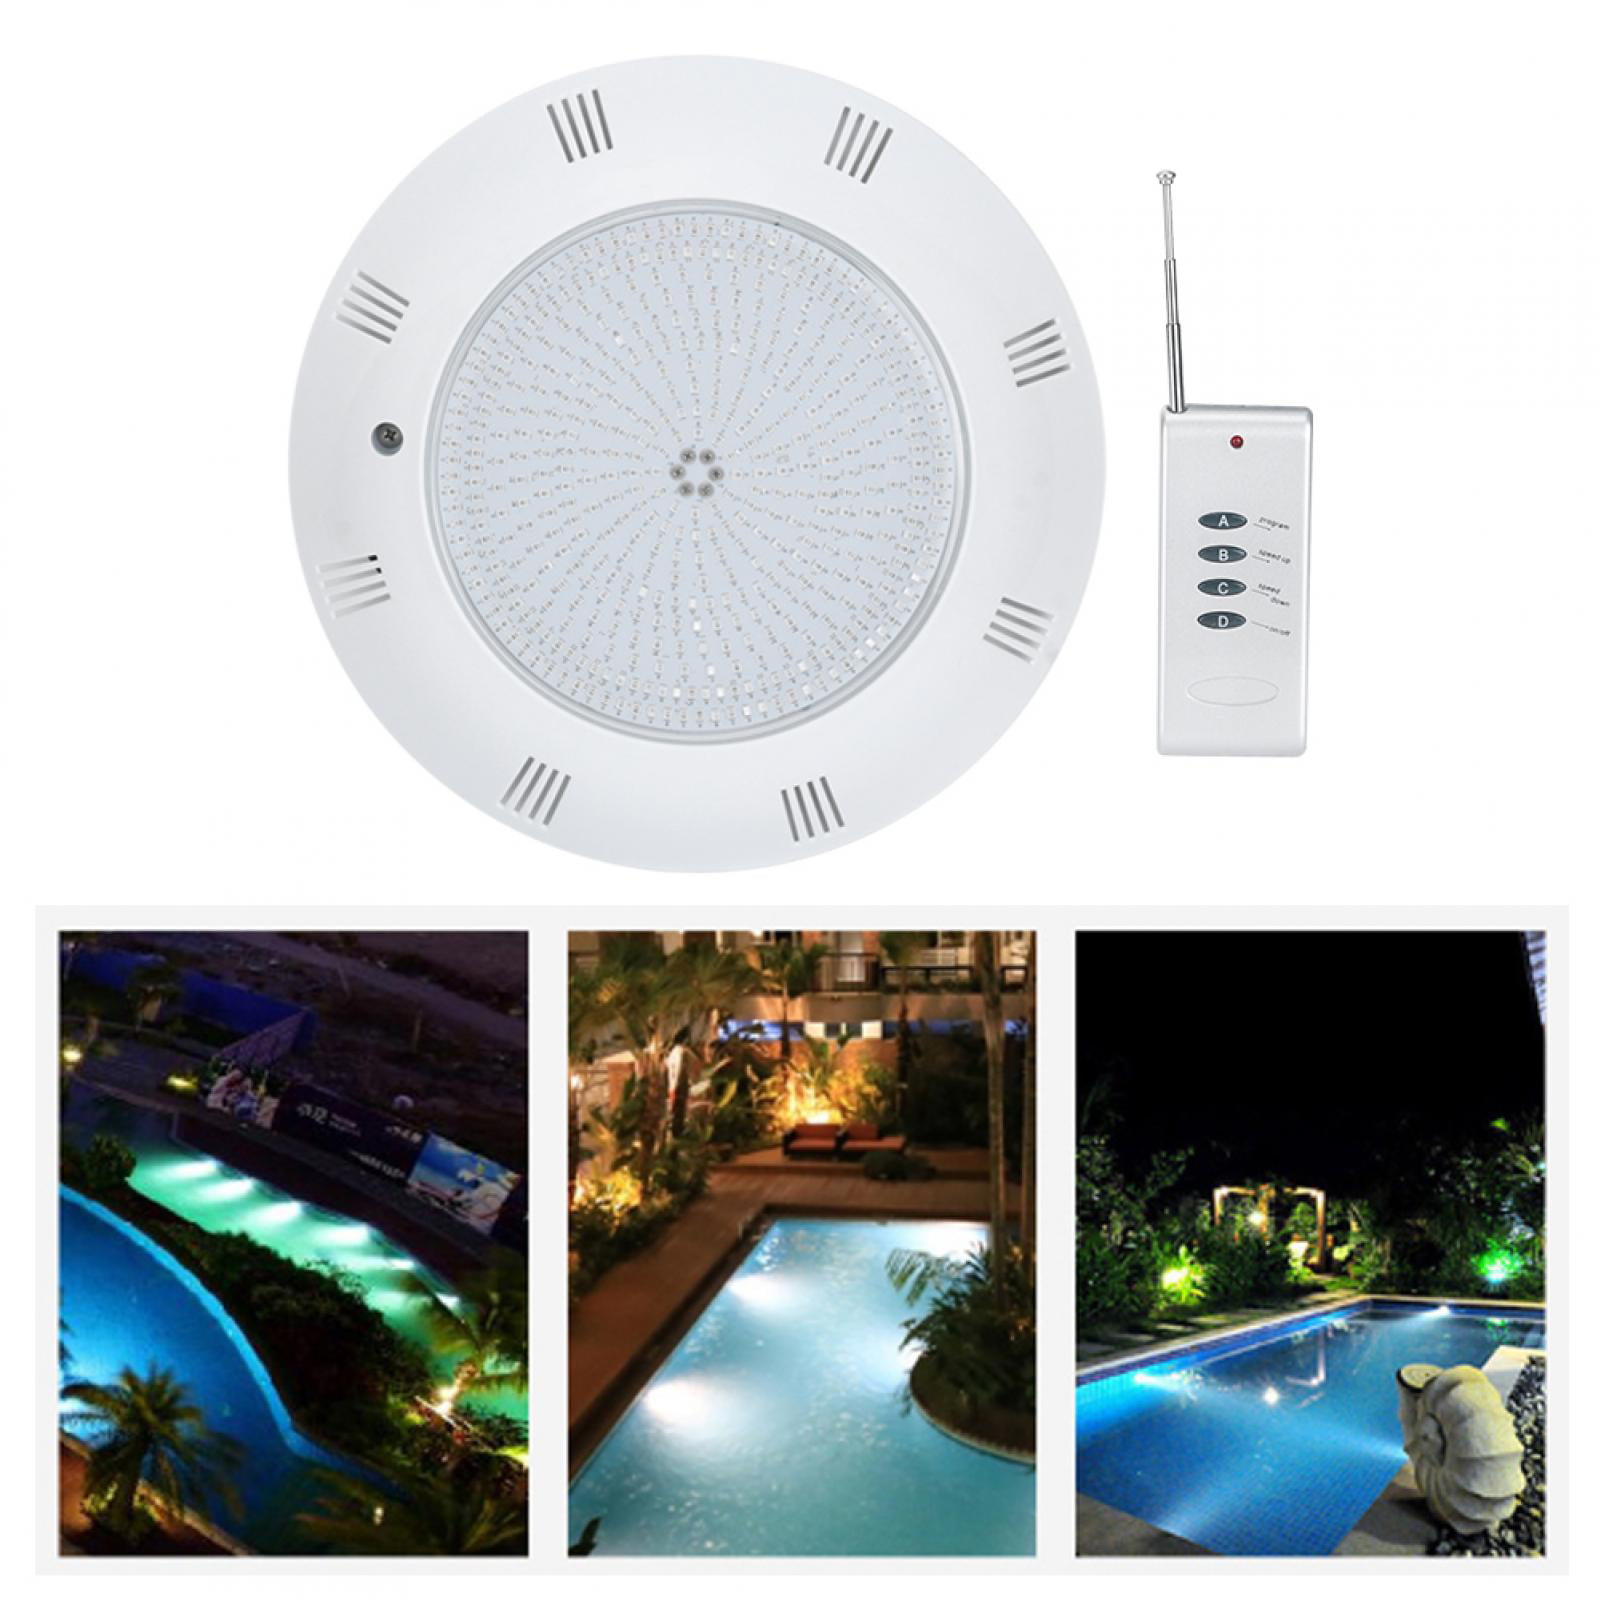 VPABES Underwater Swimming Pool Light 18W 12V LED Waterproof Spa Fountains Colorful Lamp RGB Color Changing+Switch/Remote Design 